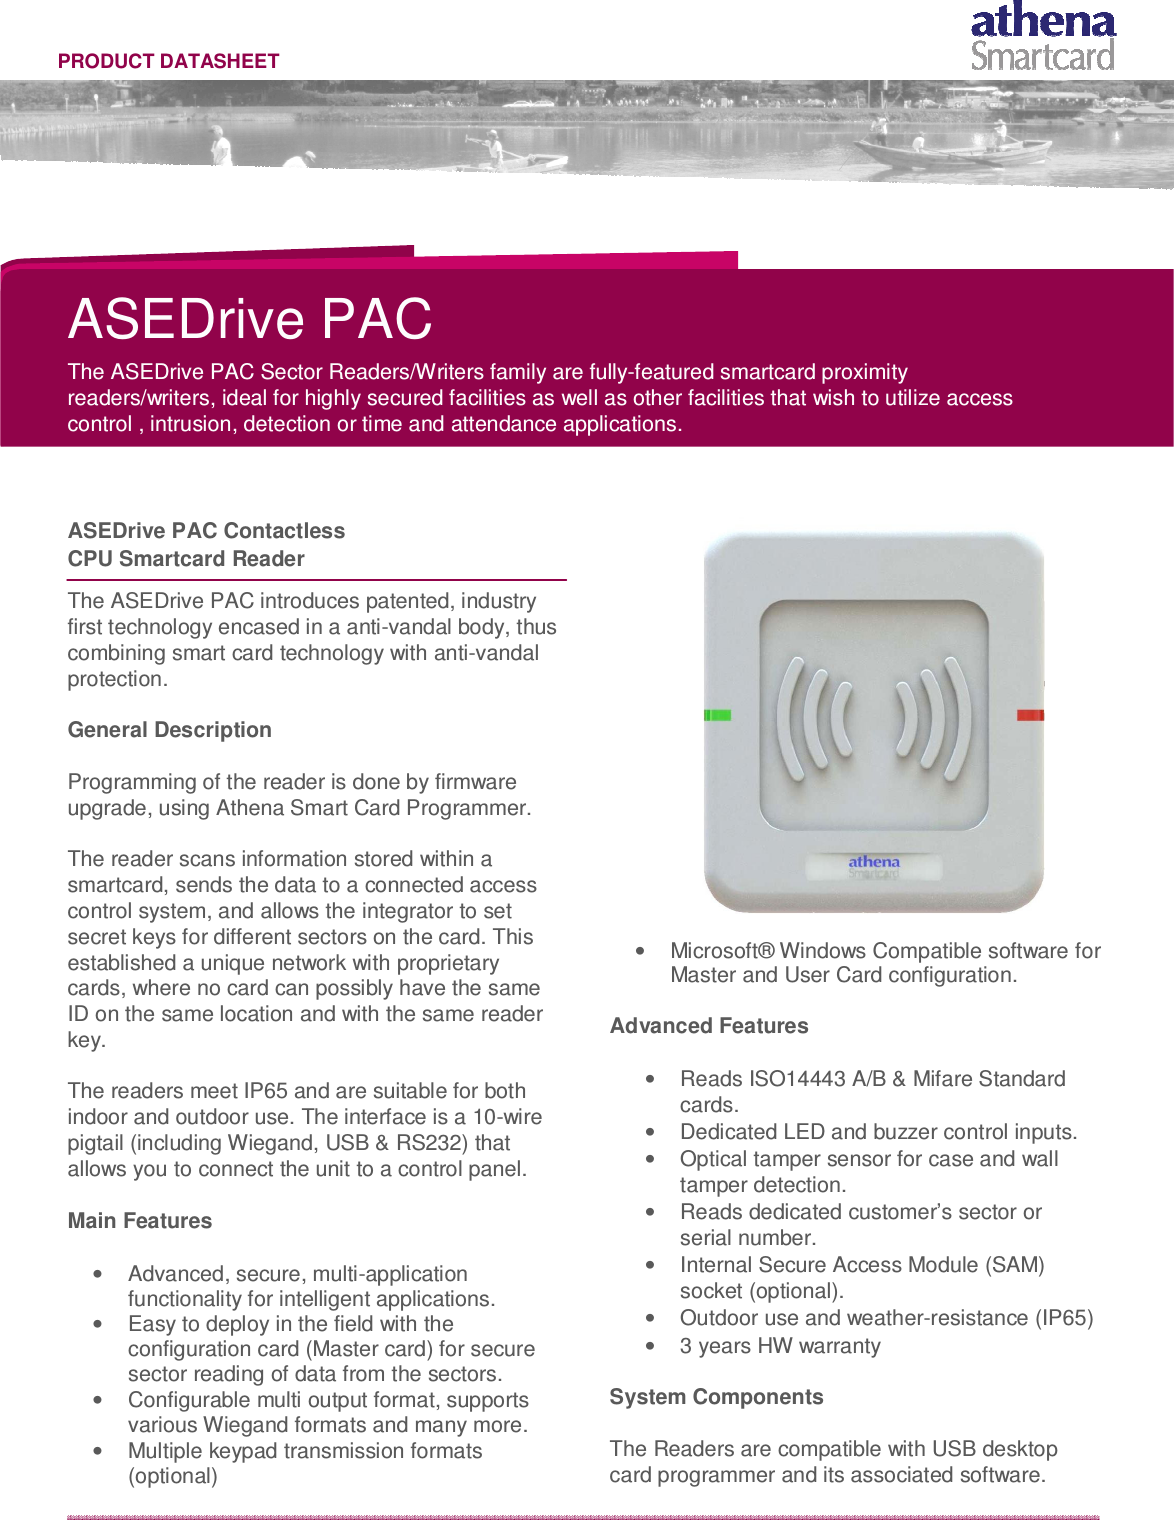   PRODUCT DATASHEET              ASEDrive PAC  The ASEDrive PAC Sector Readers/Writers family are fully-featured smartcard proximity readers/writers, ideal for highly secured facilities as well as other facilities that wish to utilize access control , intrusion, detection or time and attendance applications.     ASEDrive PAC Contactless  CPU Smartcard Reader   The ASEDrive PAC introduces patented, industry first technology encased in a anti-vandal body, thus combining smart card technology with anti-vandal protection.  General Description  Programming of the reader is done by firmware upgrade, using Athena Smart Card Programmer.  The reader scans information stored within a smartcard, sends the data to a connected access control system, and allows the integrator to set secret keys for different sectors on the card. This established a unique network with proprietary cards, where no card can possibly have the same ID on the same location and with the same reader key.  The readers meet IP65 and are suitable for both indoor and outdoor use. The interface is a 10-wire pigtail (including Wiegand, USB &amp; RS232) that allows you to connect the unit to a control panel.  Main Features  •  Advanced, secure, multi-application functionality for intelligent applications. •  Easy to deploy in the field with the configuration card (Master card) for secure sector reading of data from the sectors. •  Configurable multi output format, supports various Wiegand formats and many more. •  Multiple keypad transmission formats (optional)   •  Microsoft® Windows Compatible software for  Master and User Card configuration.  Advanced Features  •  Reads ISO14443 A/B &amp; Mifare Standard cards. •  Dedicated LED and buzzer control inputs. •  Optical tamper sensor for case and wall tamper detection. •  Reads dedicated customer’s sector or serial number. •  Internal Secure Access Module (SAM) socket (optional). •  Outdoor use and weather-resistance (IP65) •  3 years HW warranty  System Components  The Readers are compatible with USB desktop card programmer and its associated software. 